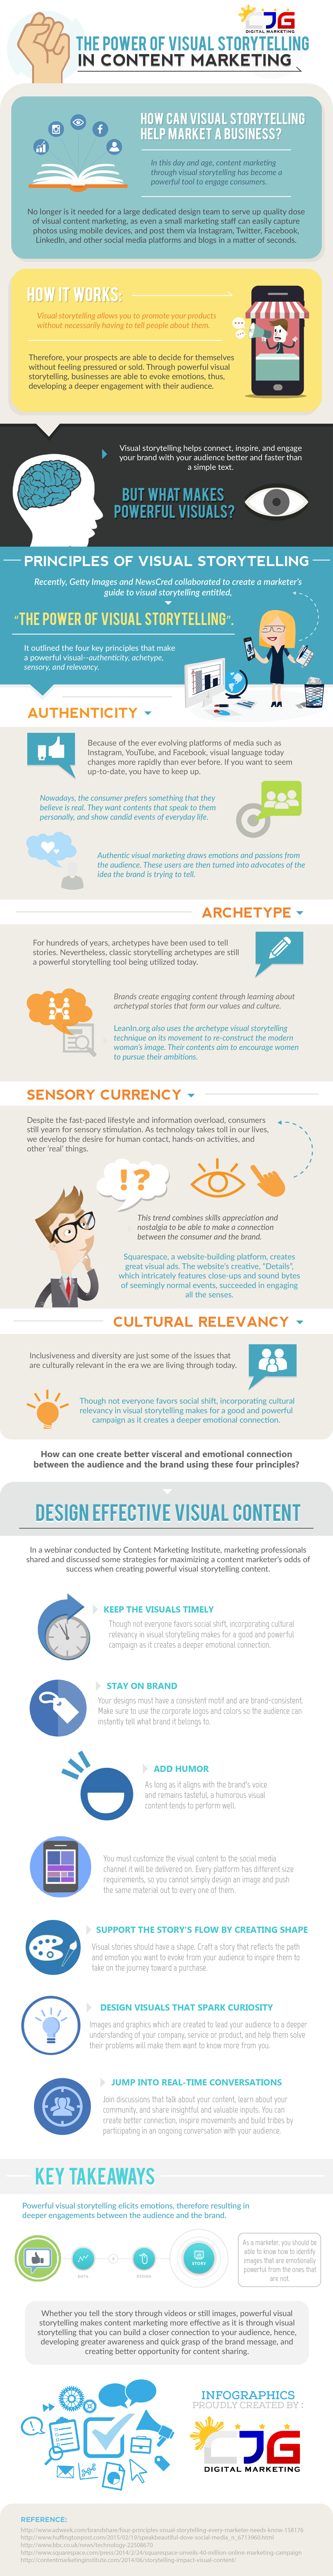 The Power of Visual Storytelling in Content Marketing (Infographic) - An Infographic from CJG Digital Marketing